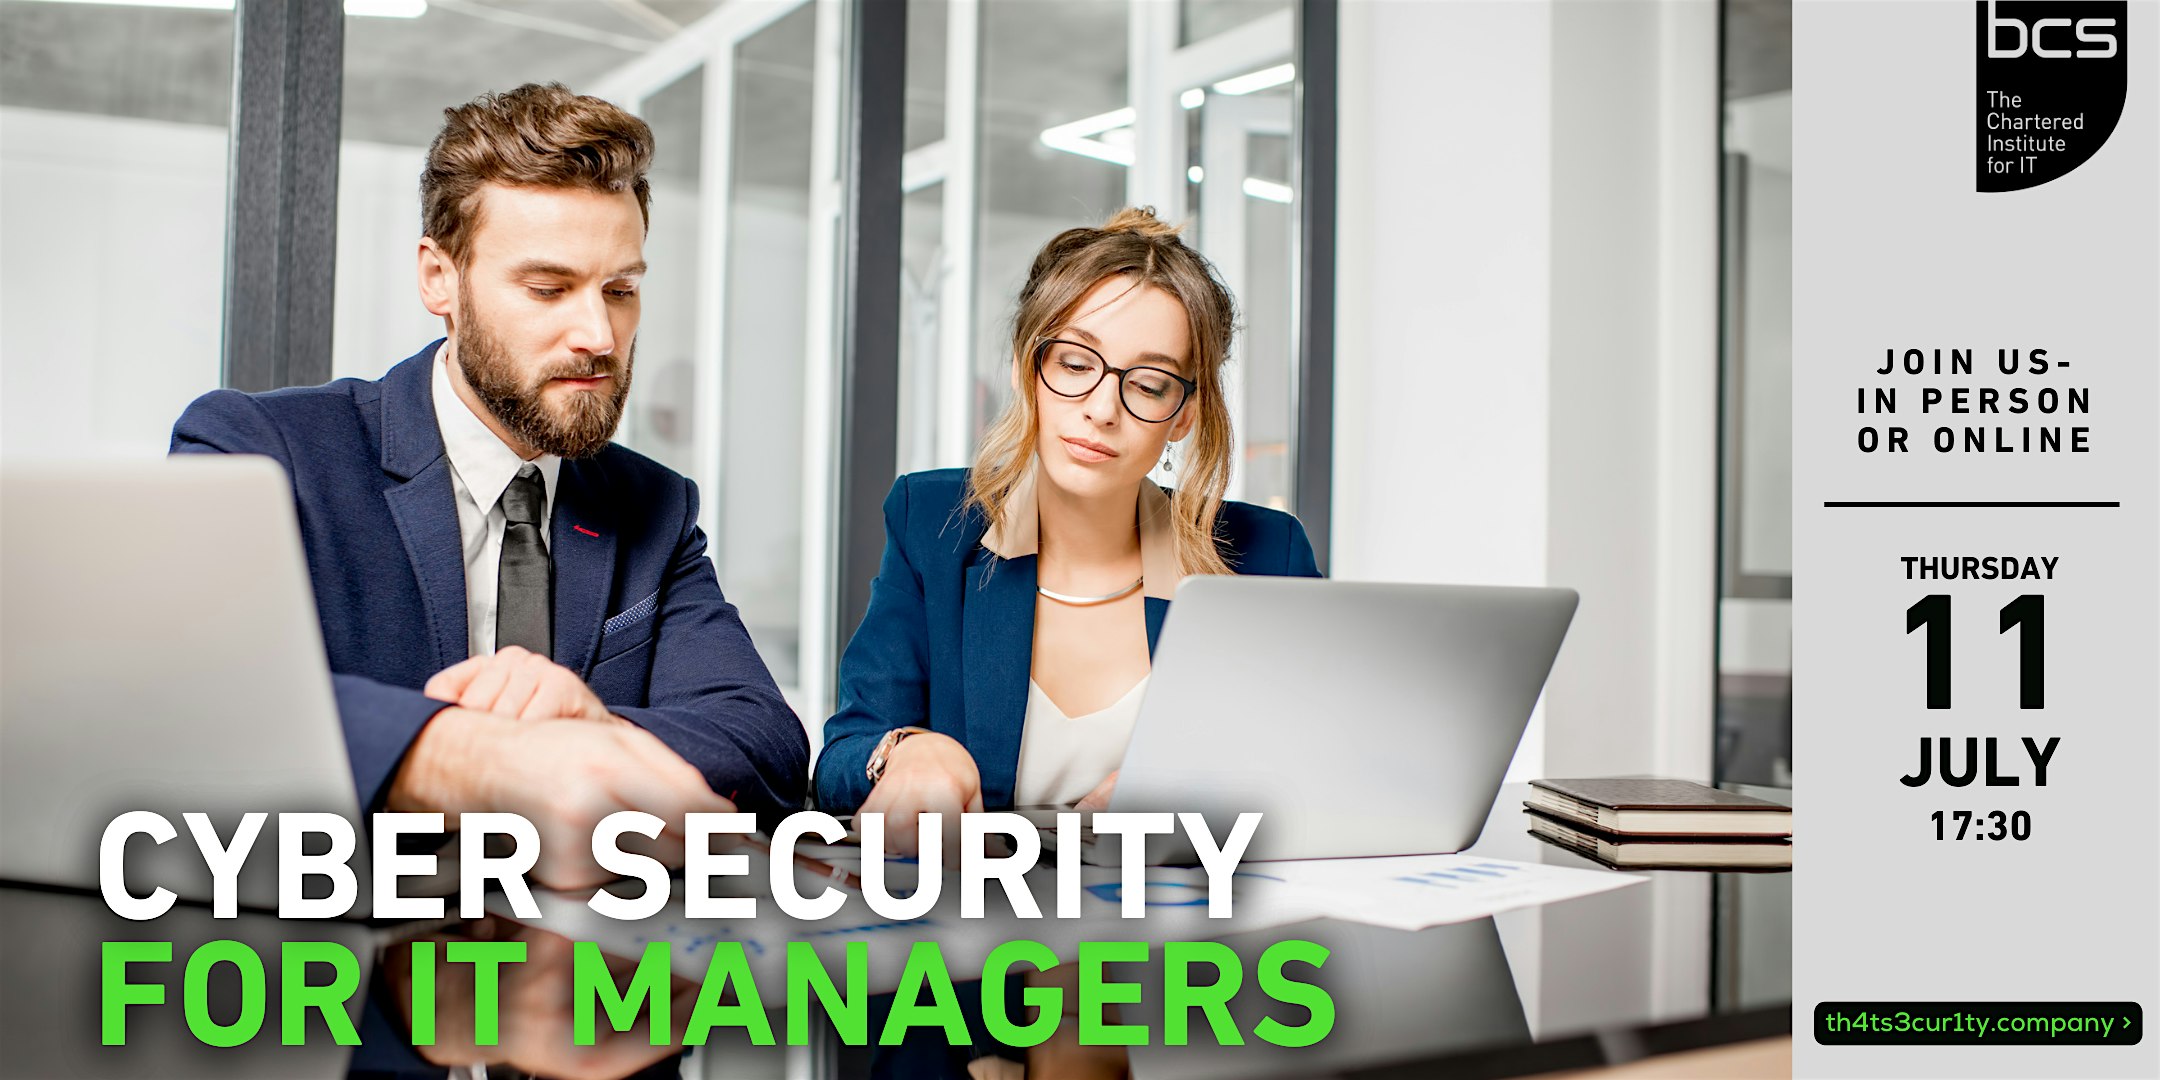 Hybrid - Cyber Security for IT Managers